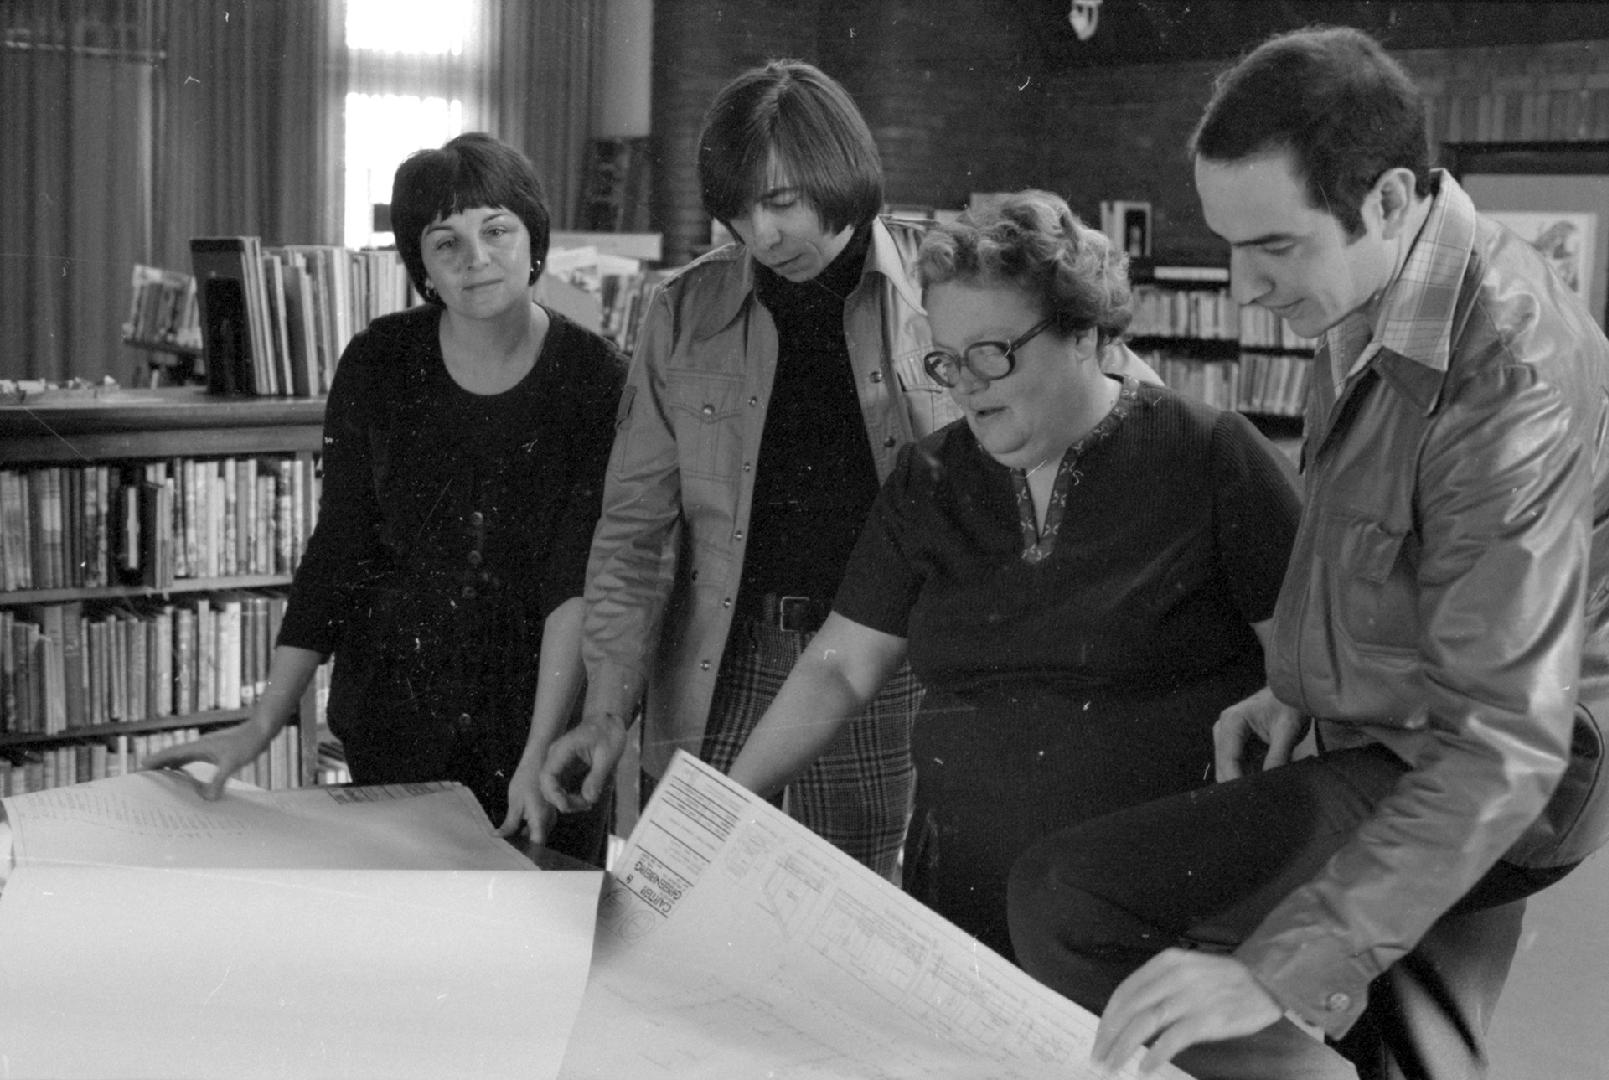 Sheila Blinoff of the Ward 9 Community News, architect Phil Carter, citizen advisor Ann Doherty and architect Ken Greenberg look at plans for Eastern Branch